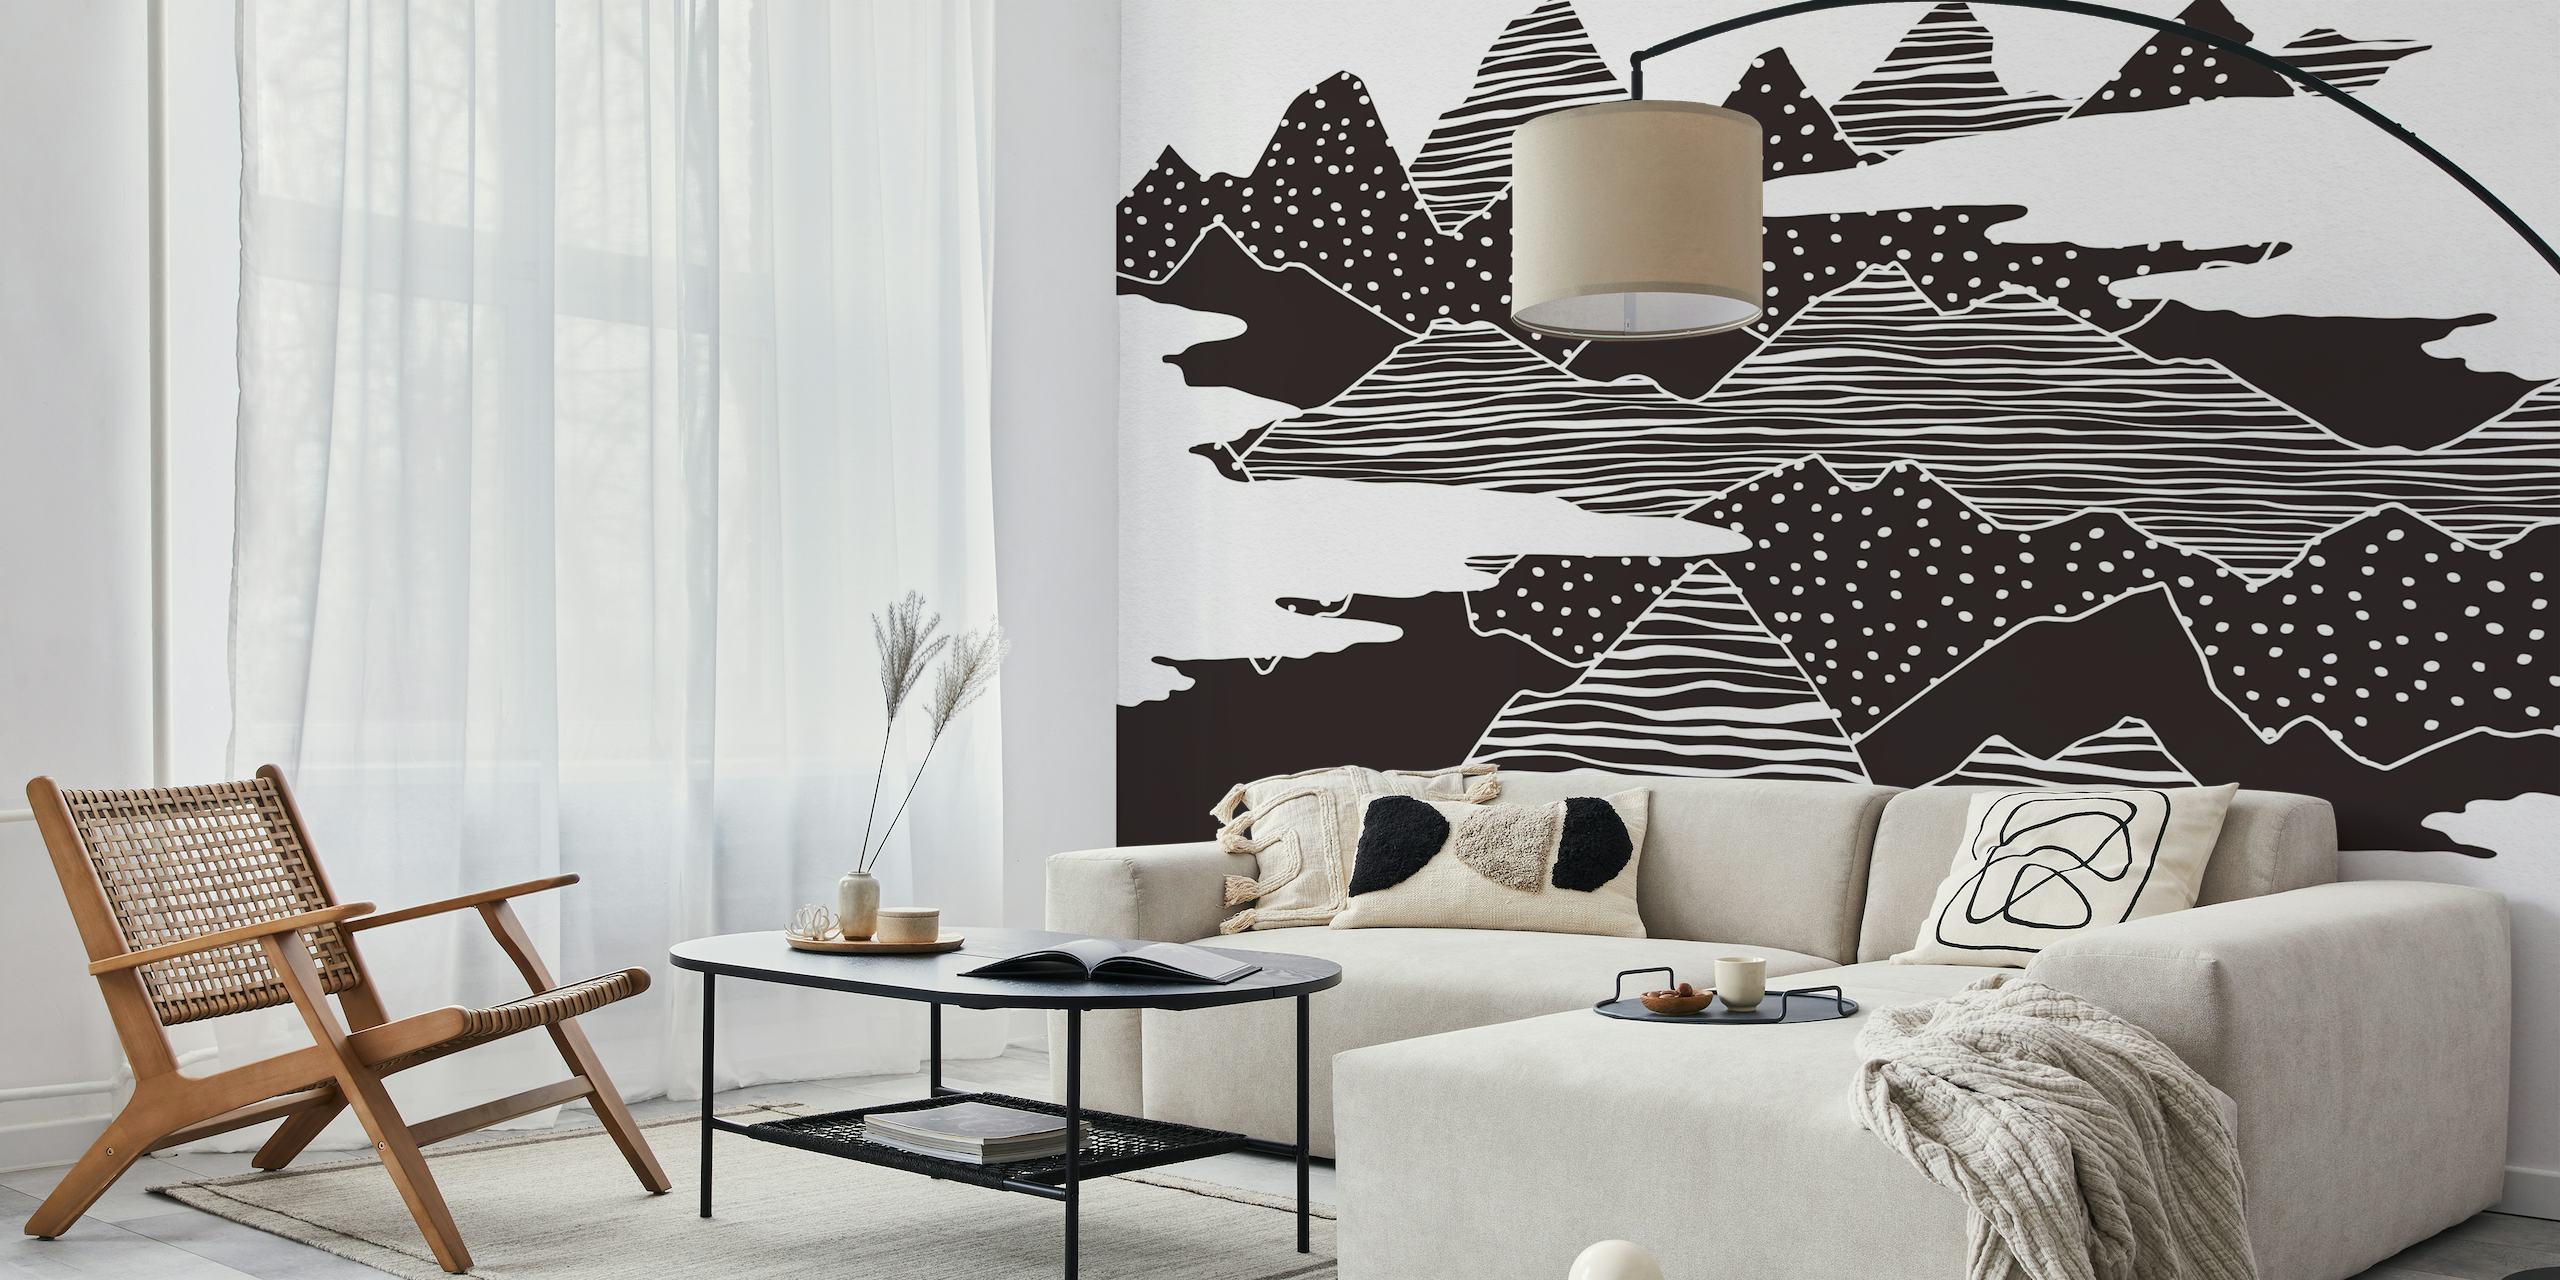 Abstract black and white mural of stylized mountain peaks with dotted textures